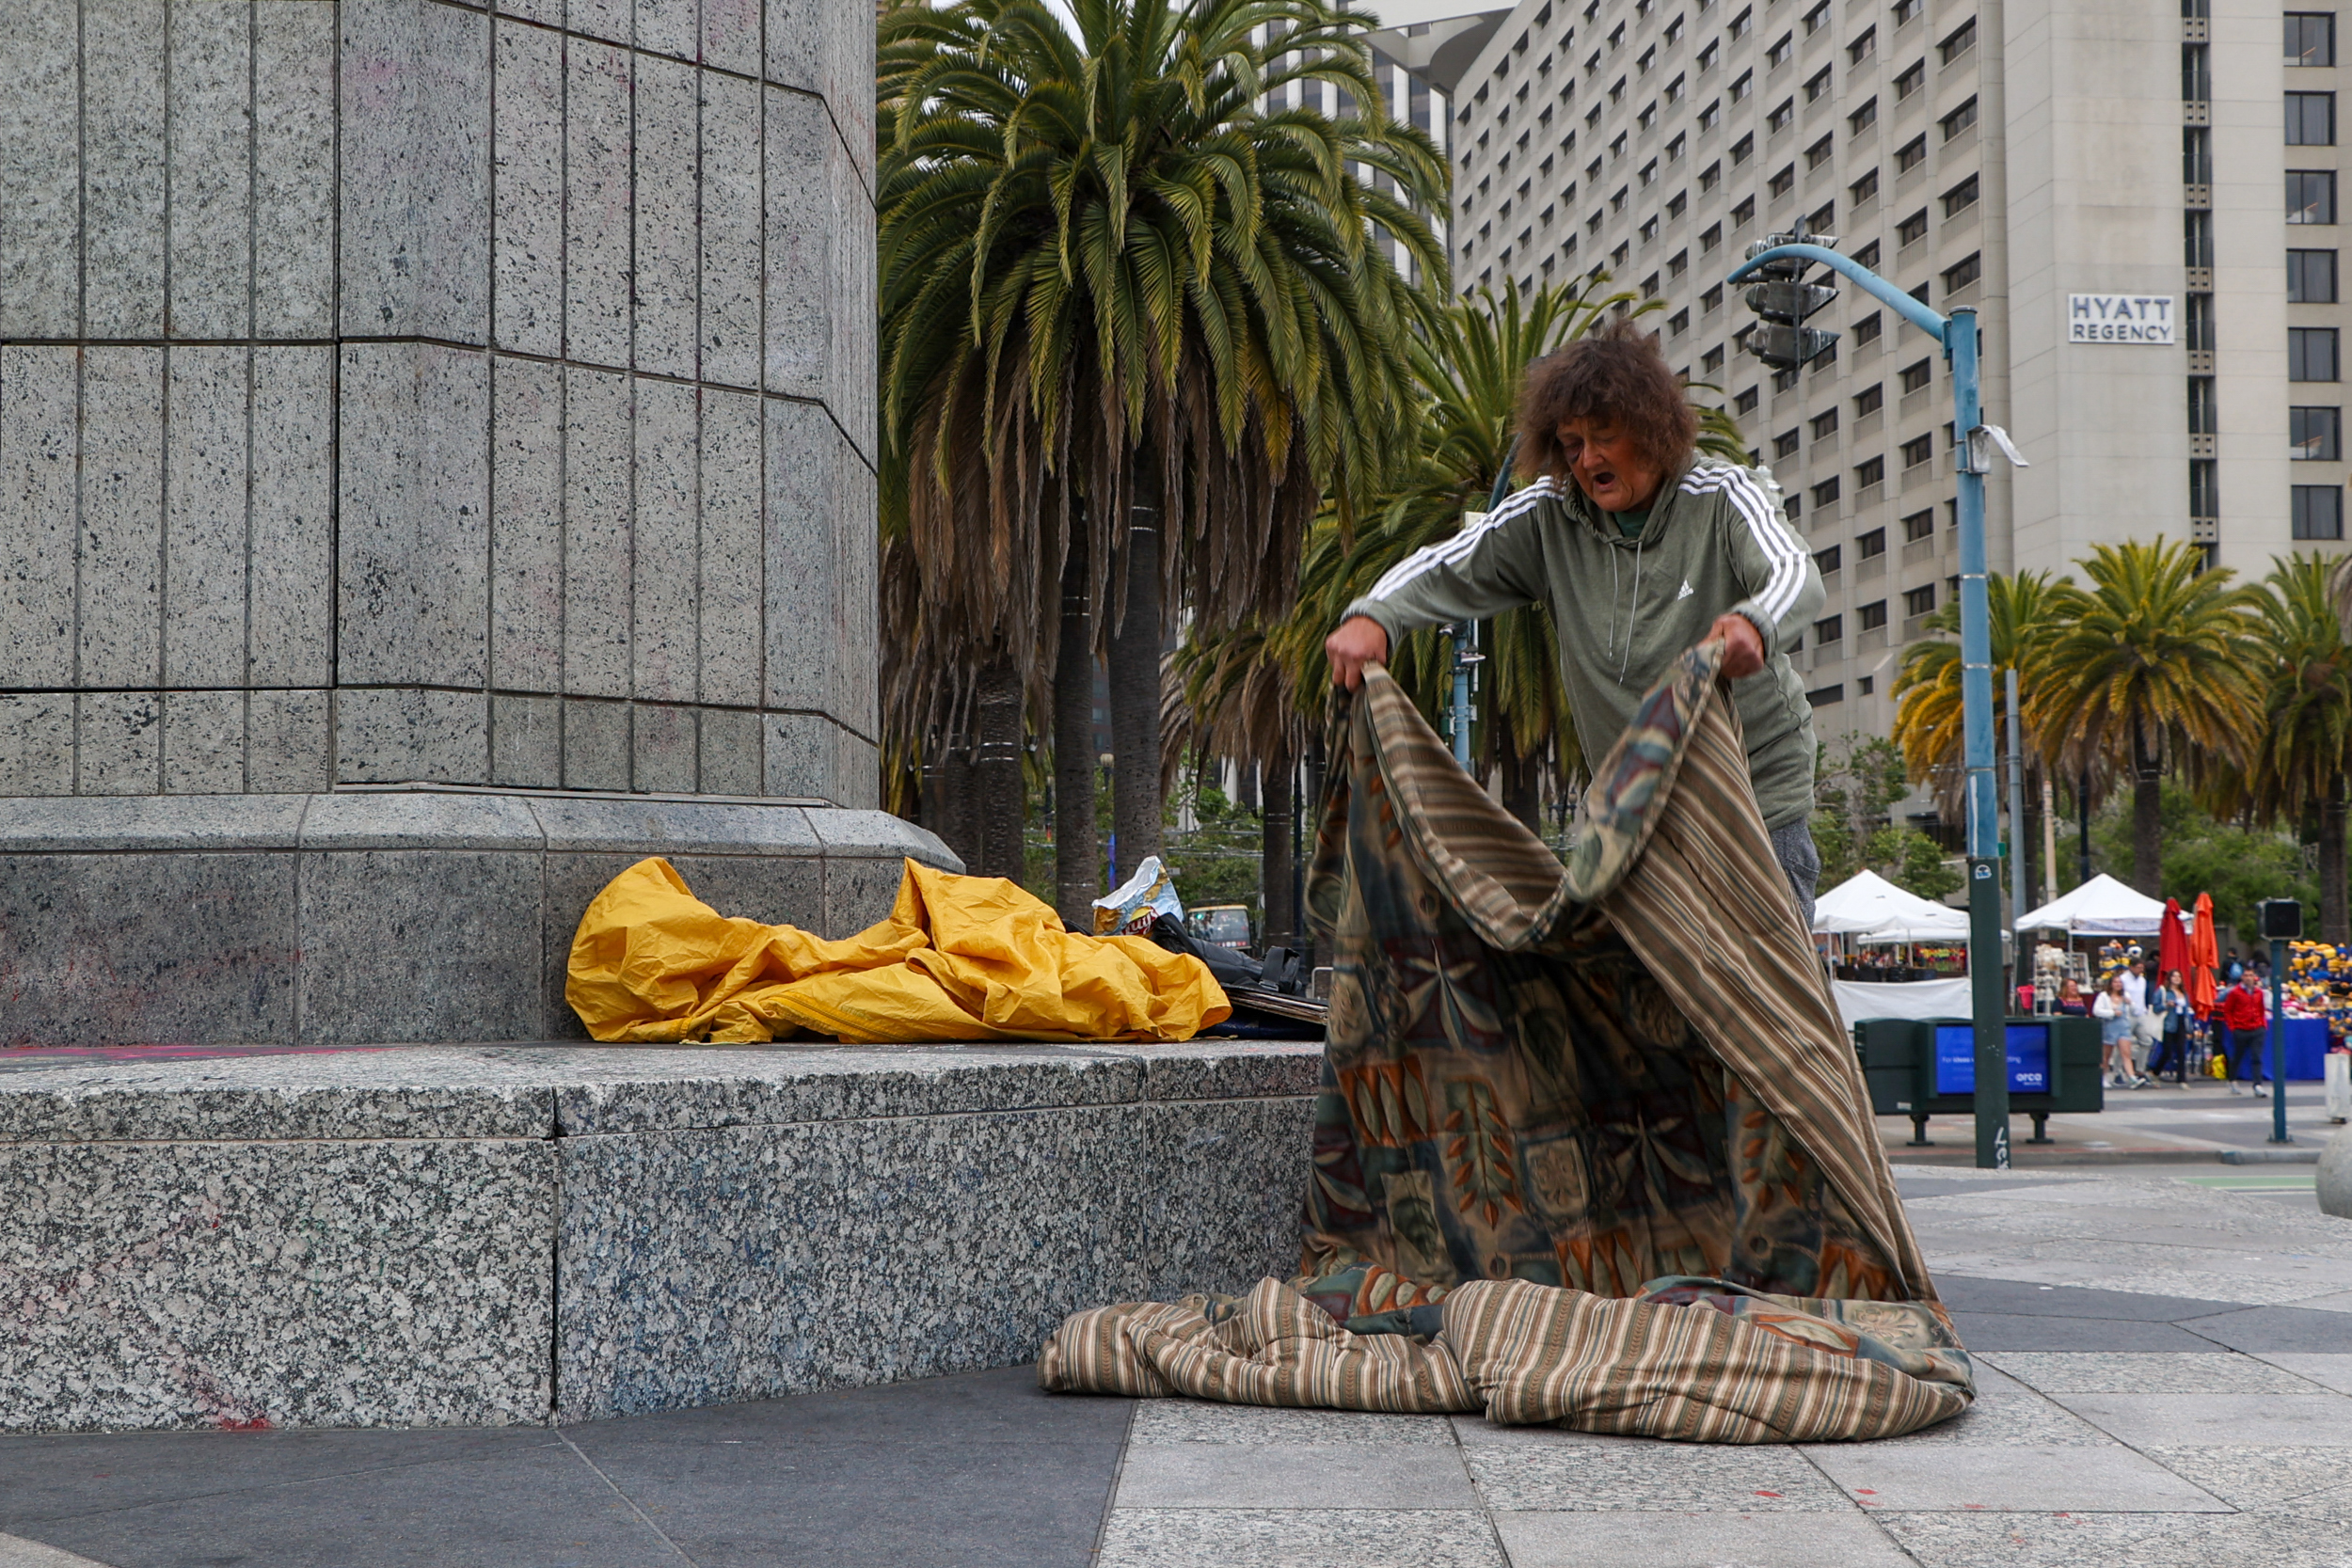 A person prepares a sleeping bag on the street.